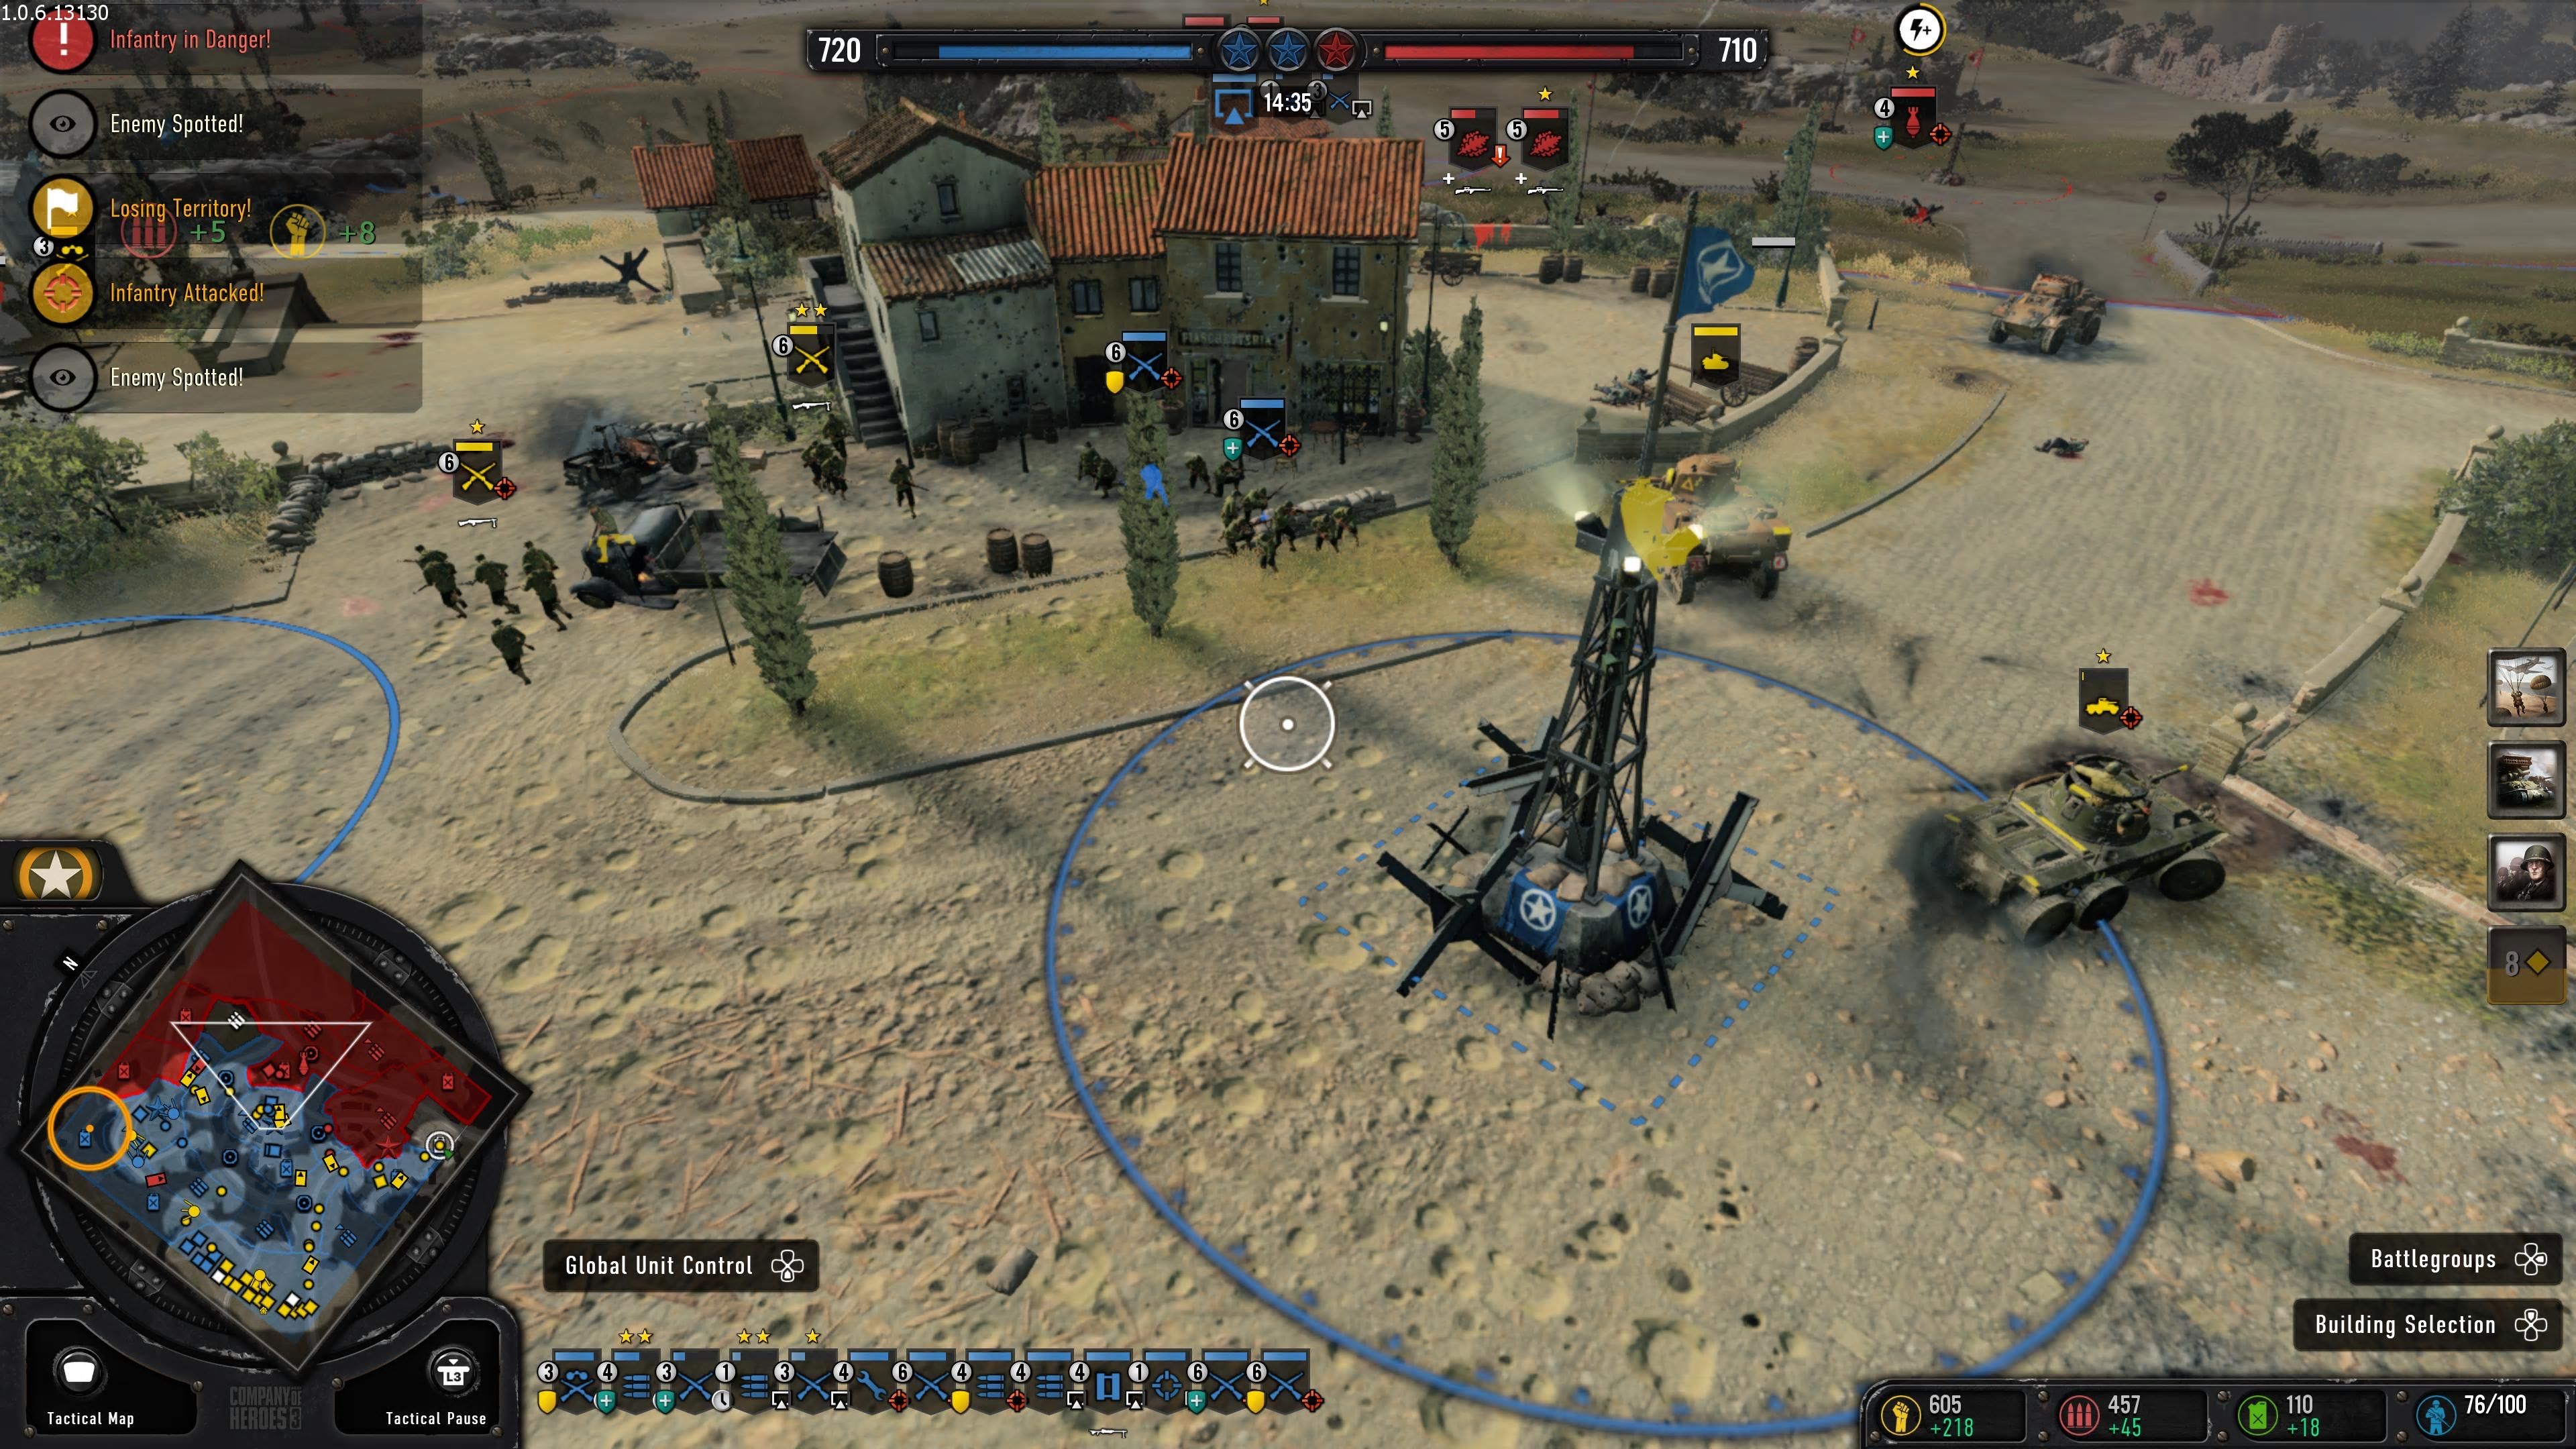 In-game screenshot of a Company of Heroes 3 skirmish. Tanks and ground troops surround an objective in a town square, while the mini map in the corner shows which factions control sectors of the battlefield.